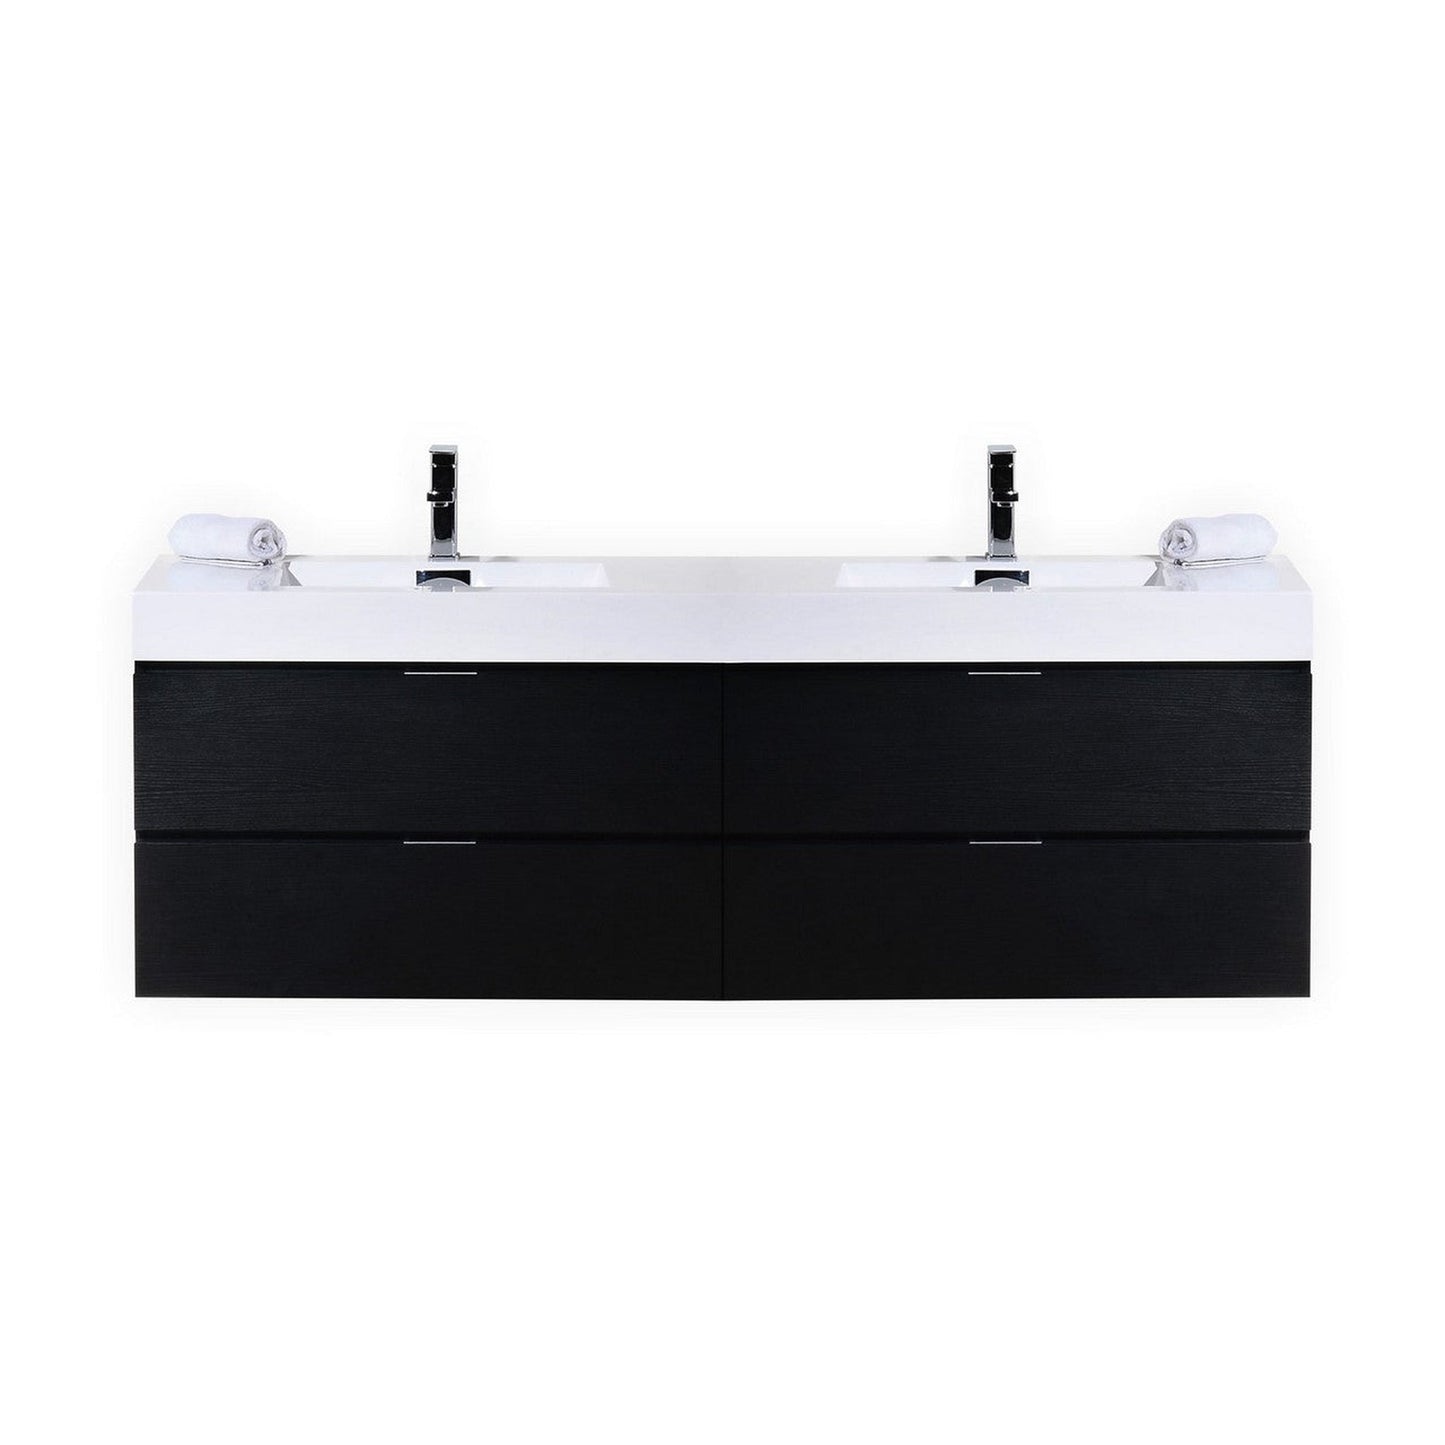 KubeBath Bliss 80" Black Wall-Mounted Modern Bathroom Vanity With Double Integrated Acrylic Sink With Overflow and 22" Black Framed Two Mirrors With Shelf